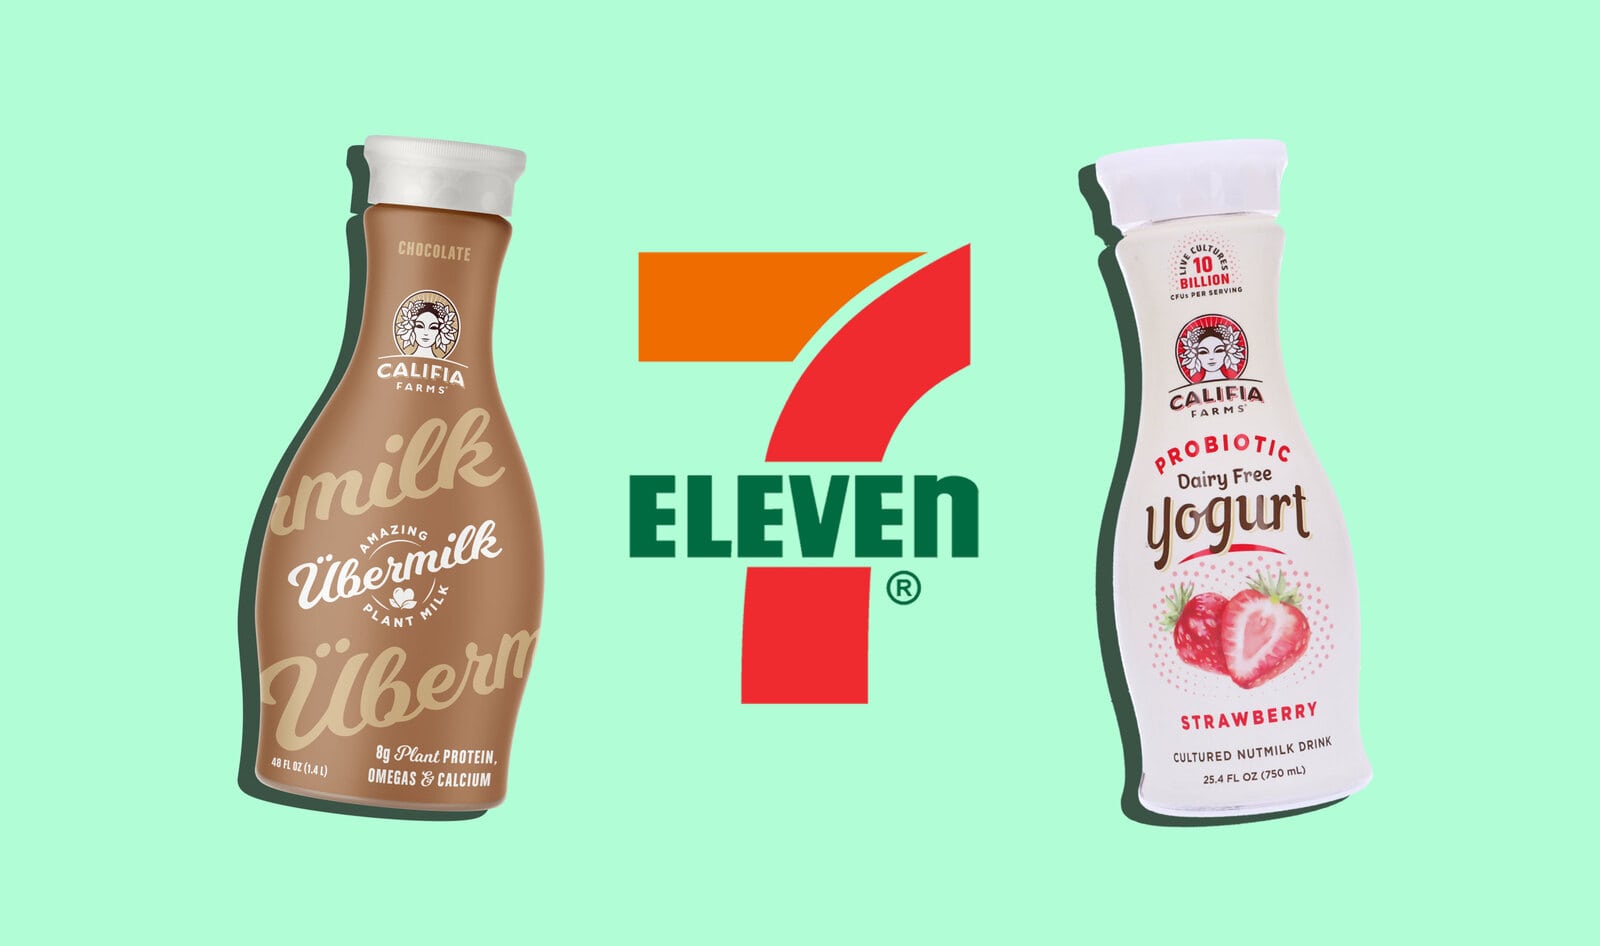 Vegan Brand Califia Farms Partners with 7-Eleven